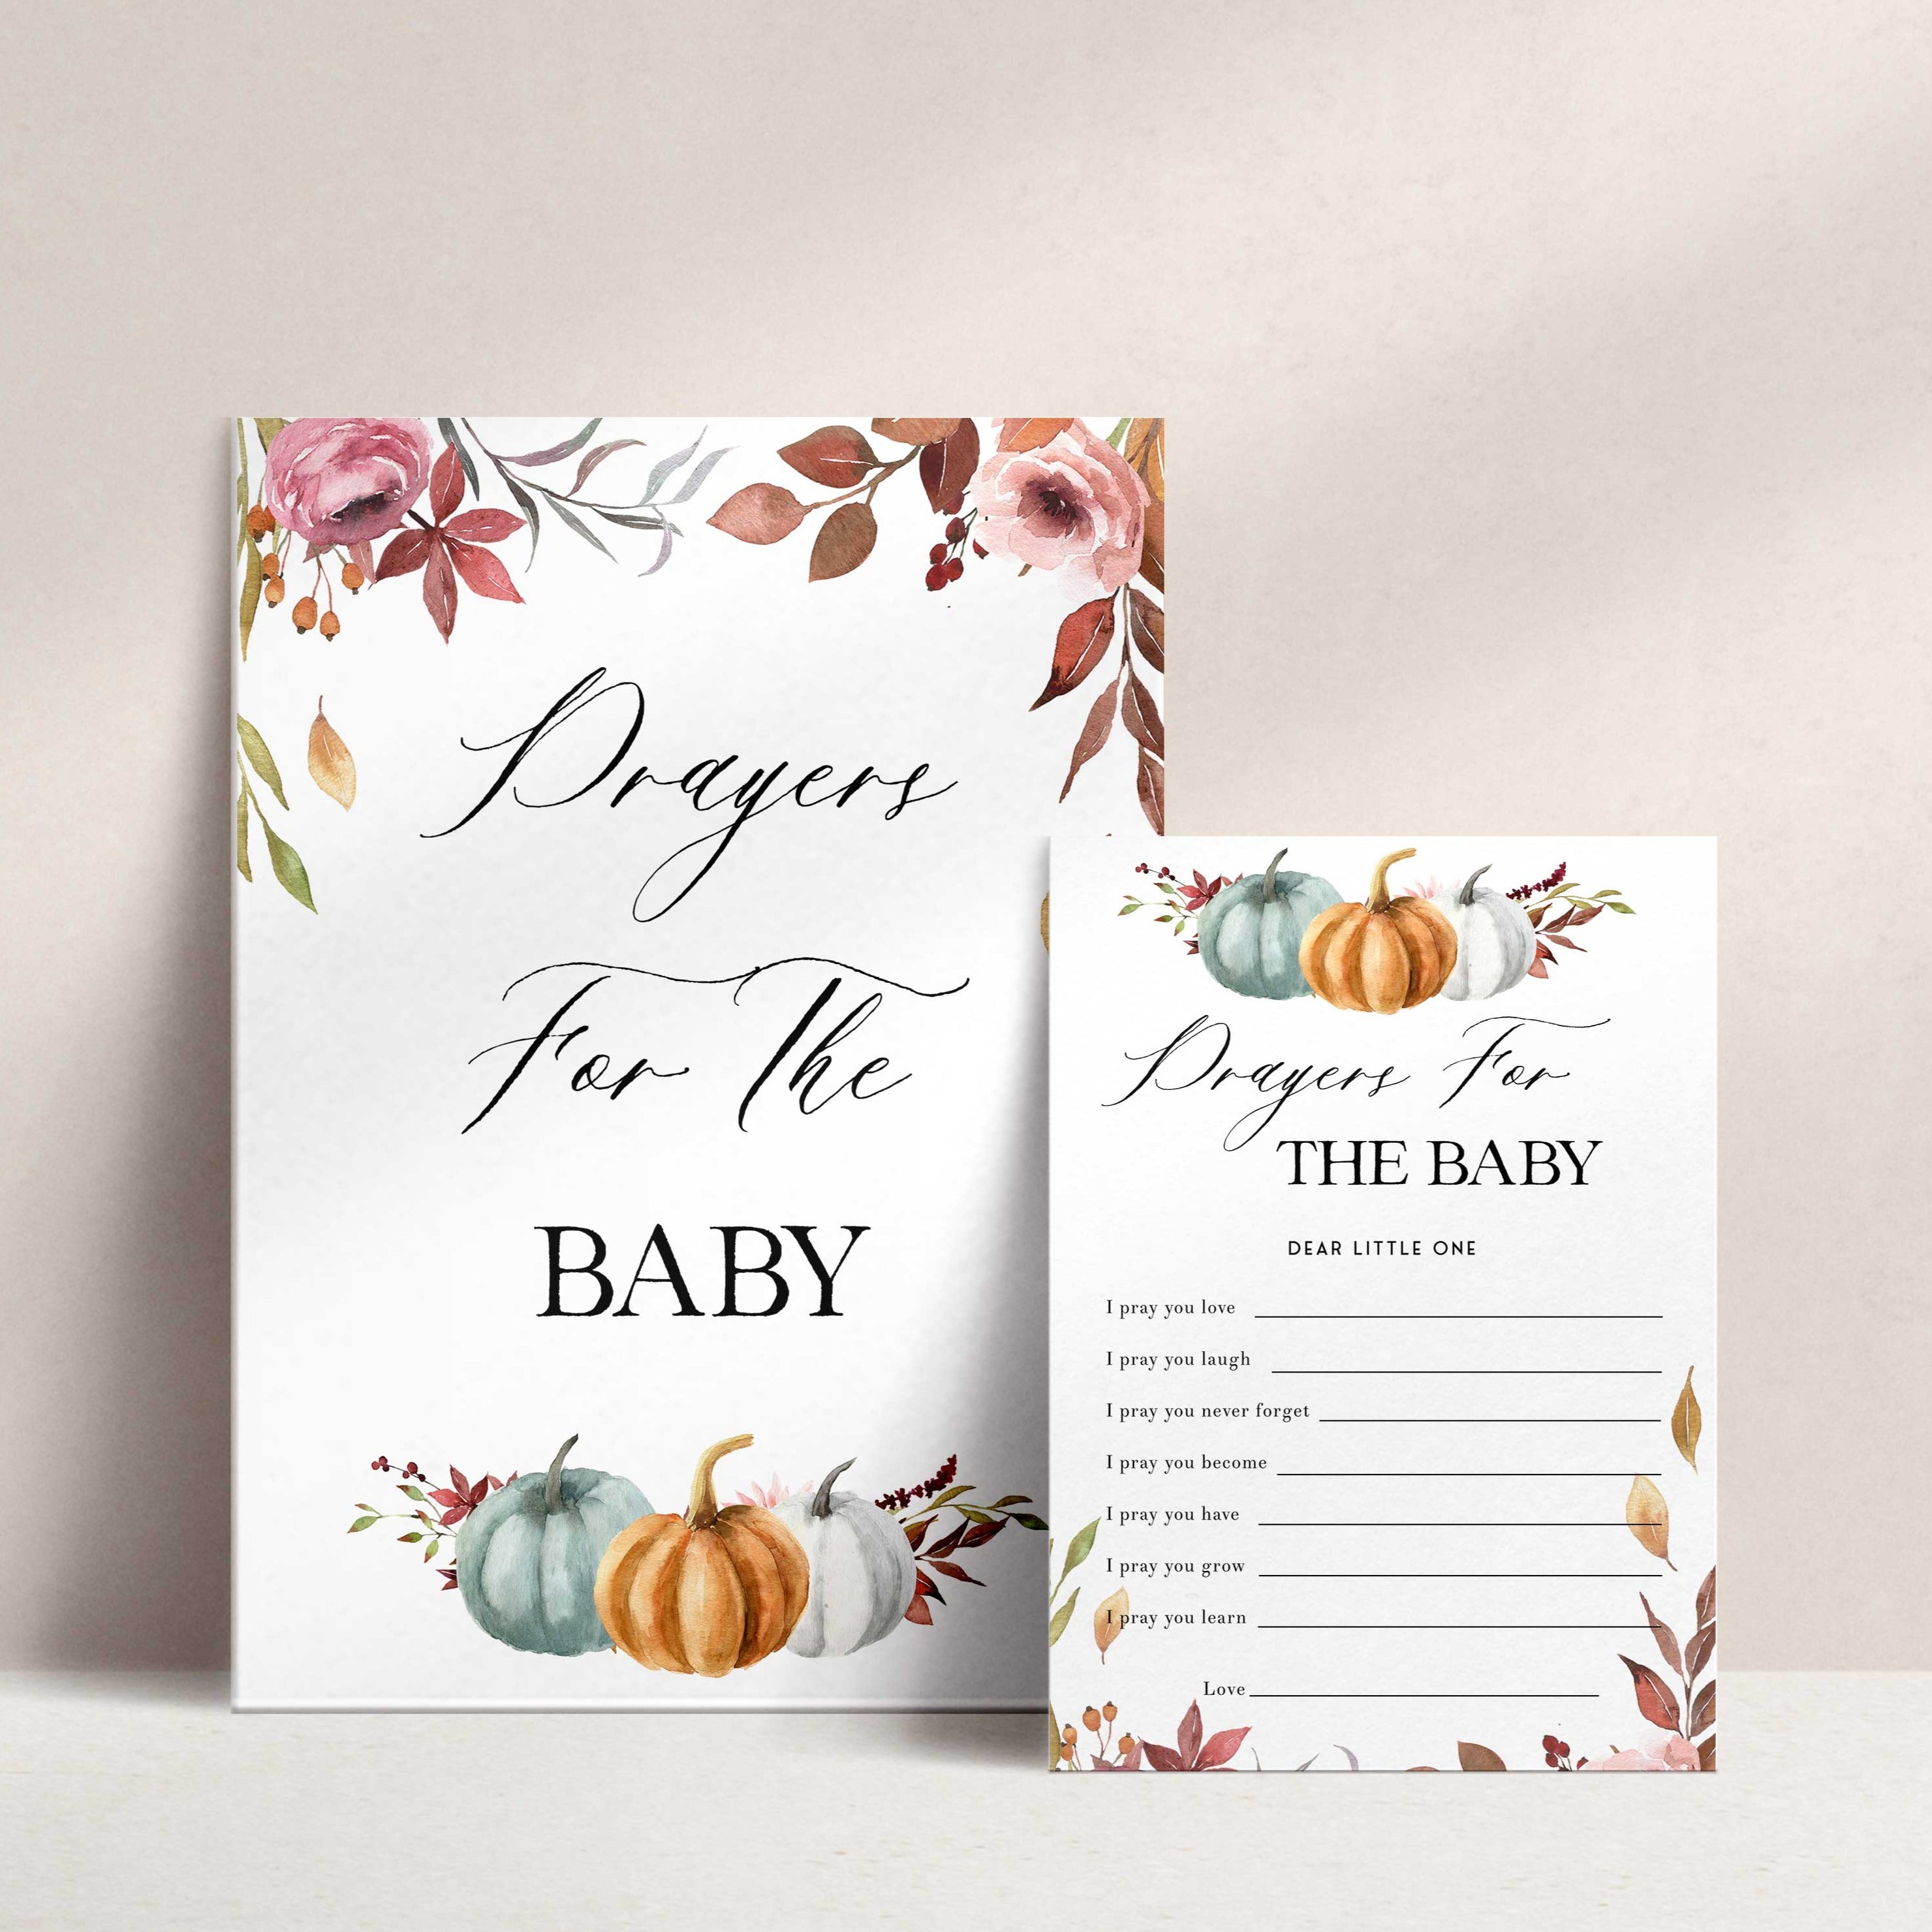 Fully editable and printable baby shower prayers for the baby game with a fall pumpkin design. Perfect for a Fall Pumpkin baby shower themed party